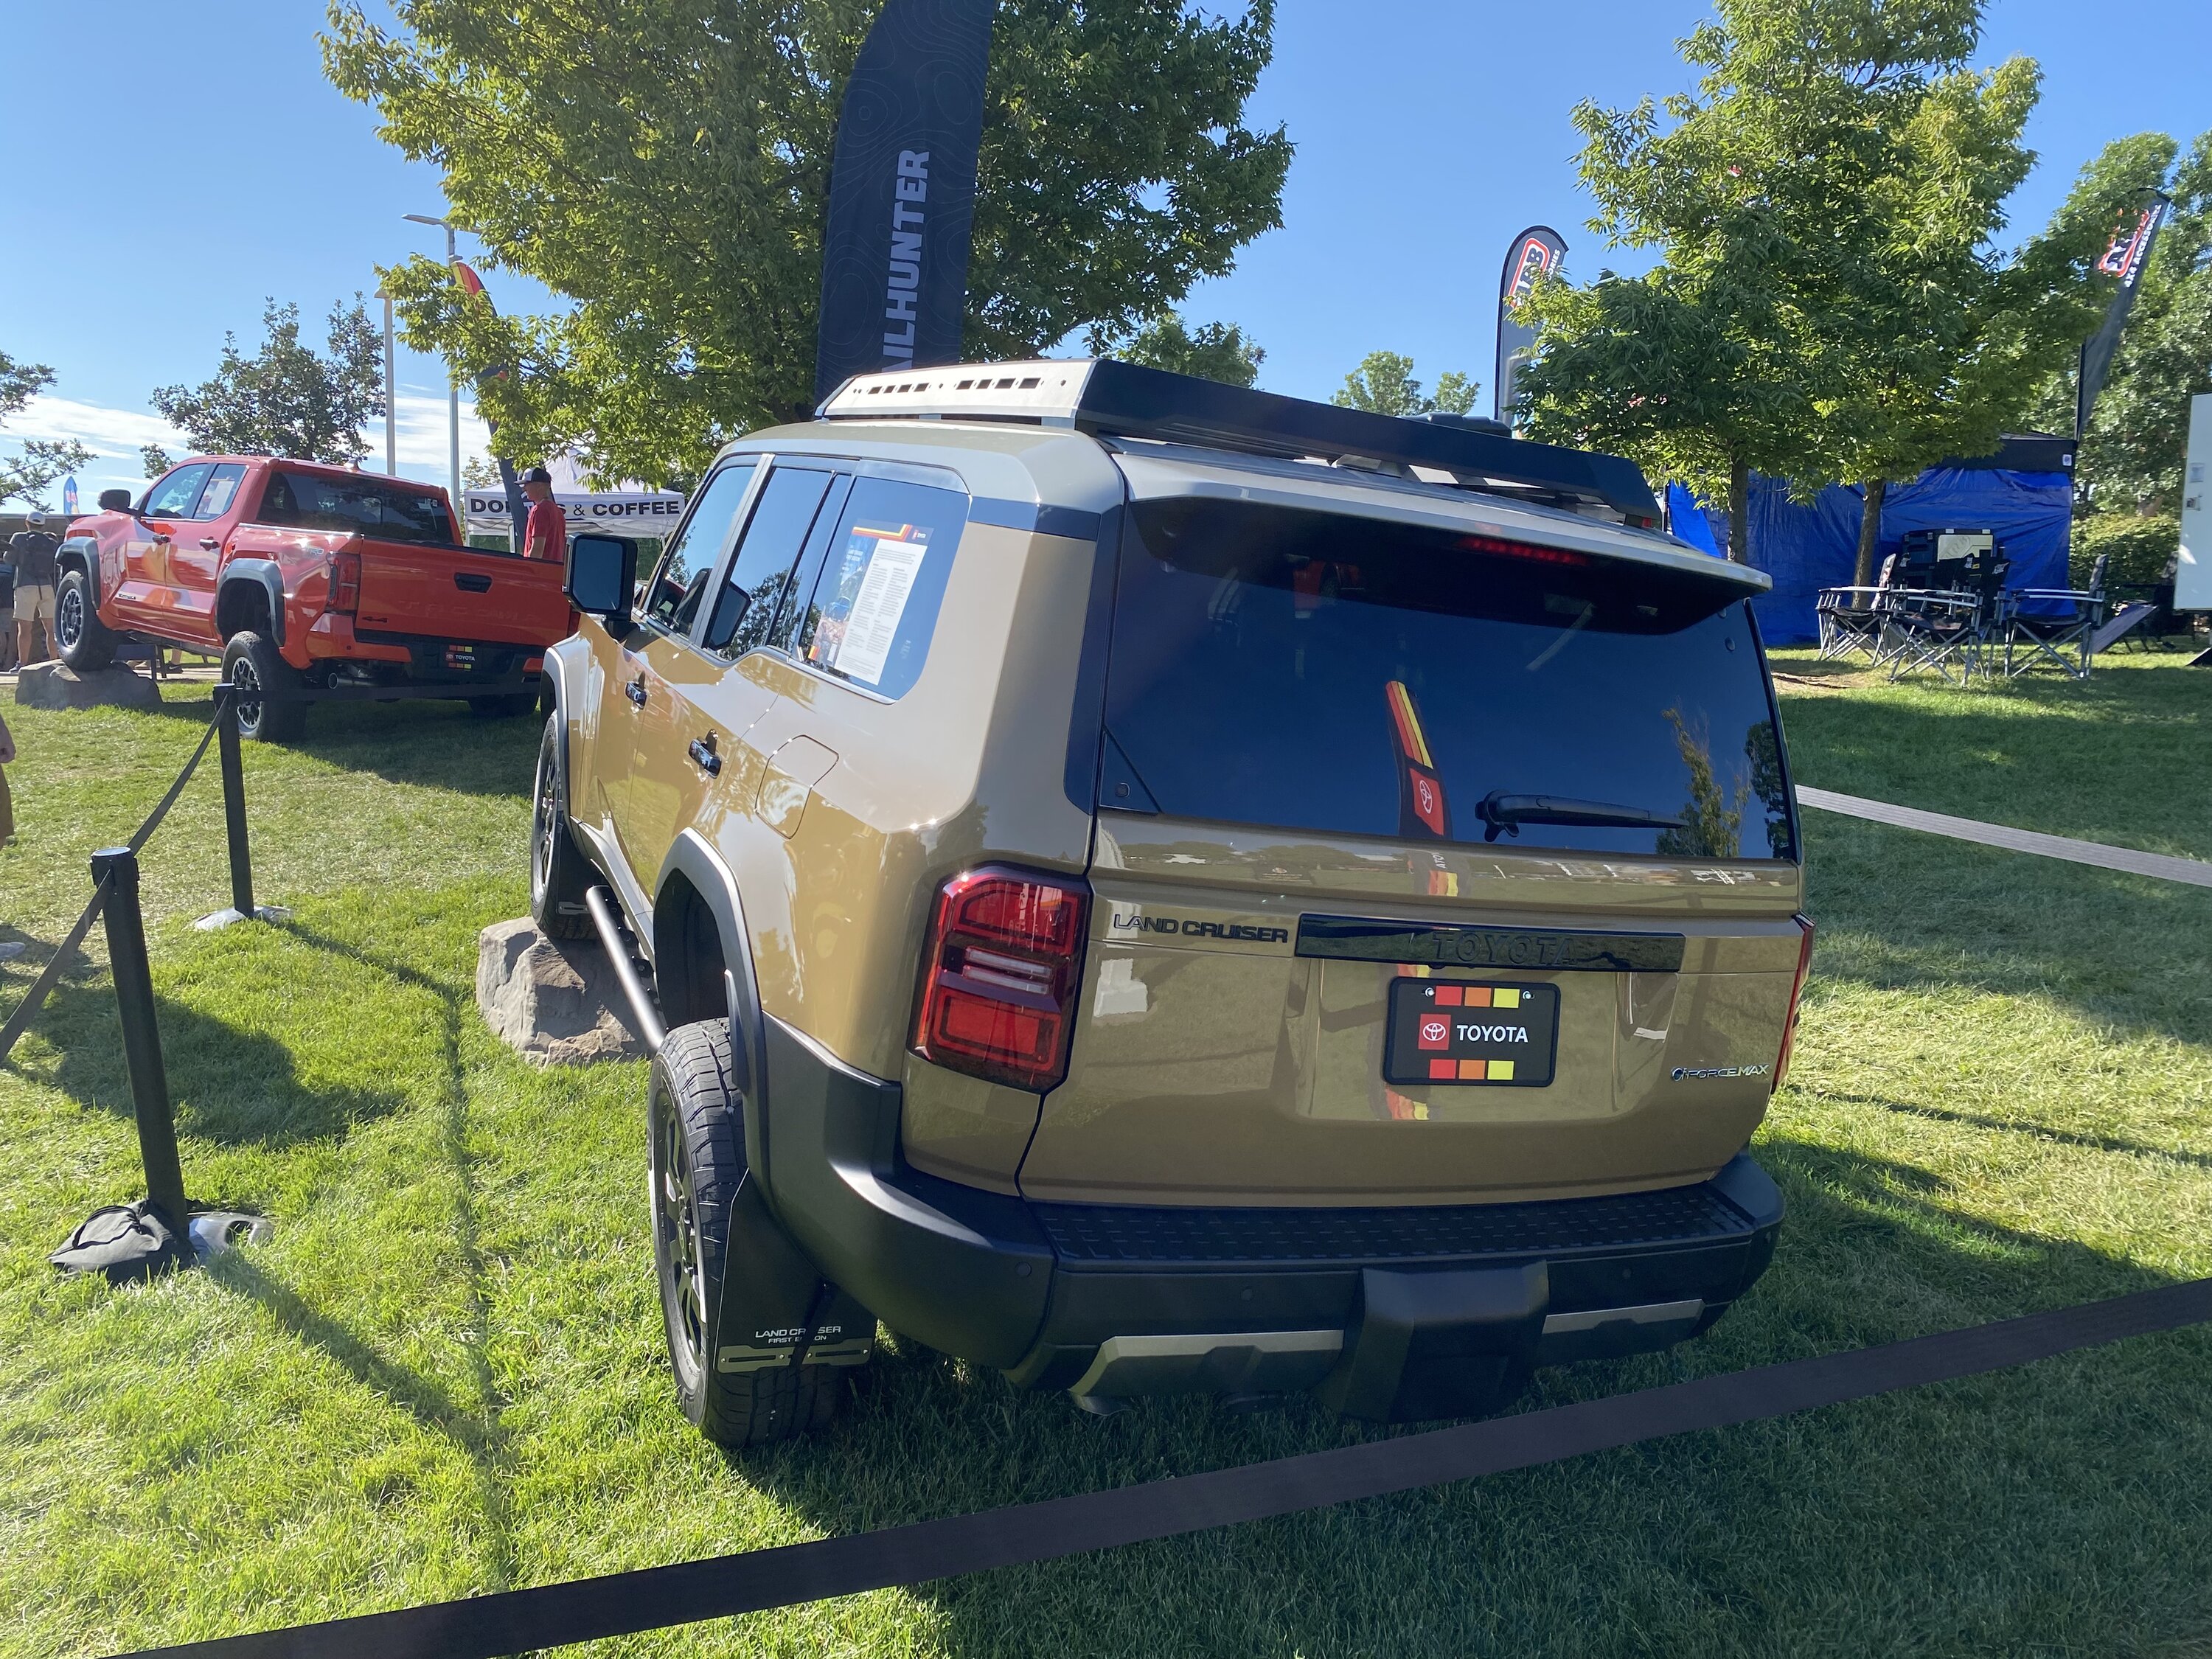 2025 Land Cruiser 2024 Land Cruiser First Edition Makes Public Debut @ Overland Expo Mountain West IMG_6421.JPG